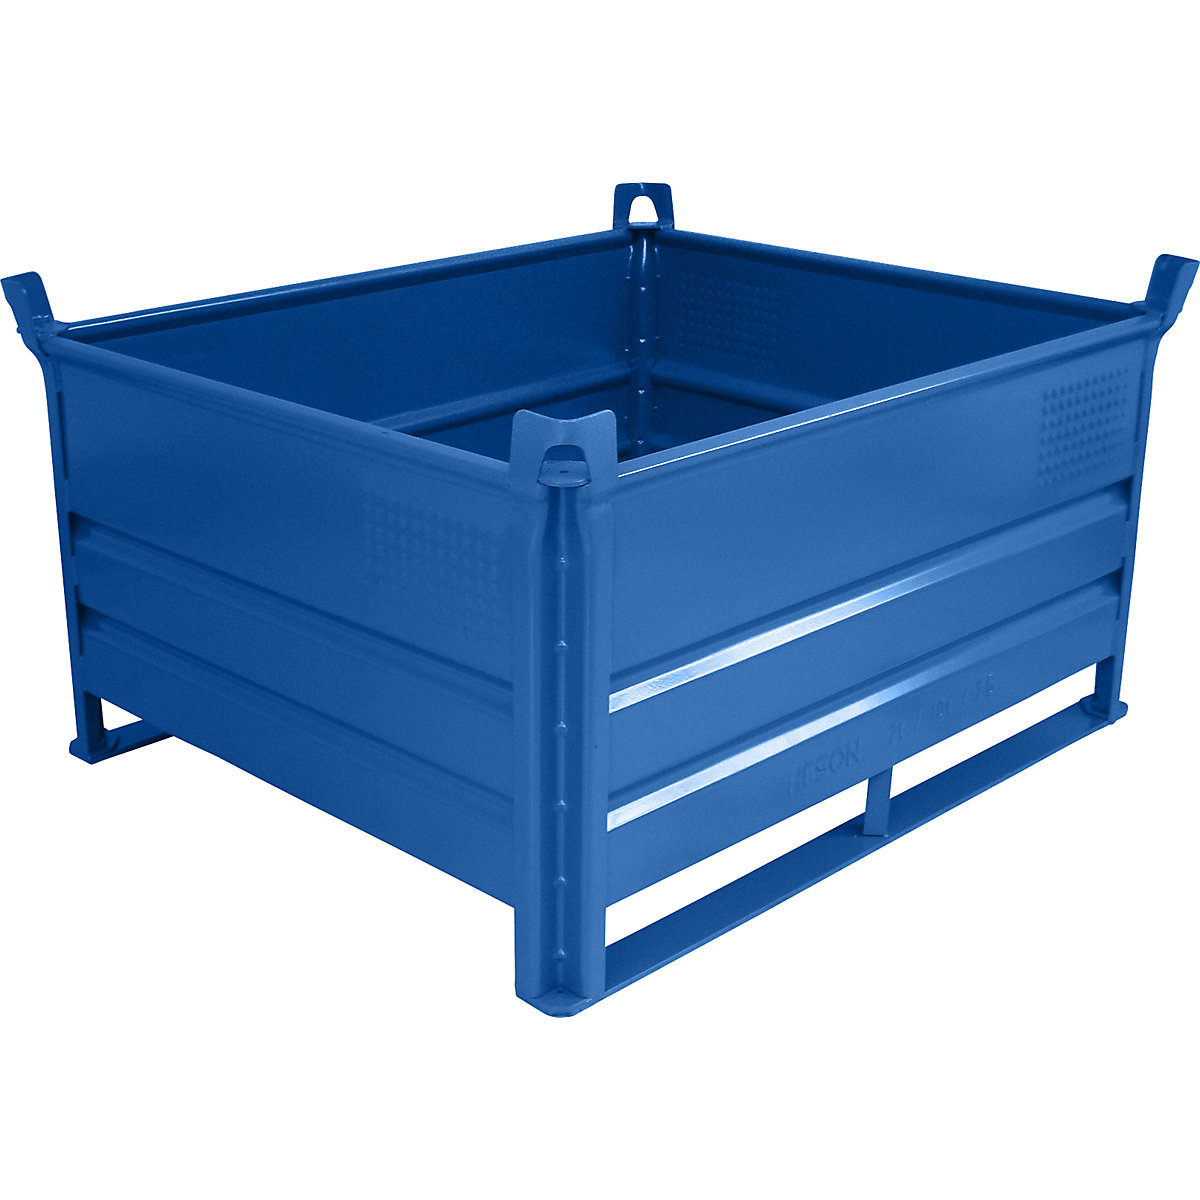 Stacking container with runners – Heson, LxW 1000 x 800 mm, max. load 1000 kg, blue, 10+ items-4